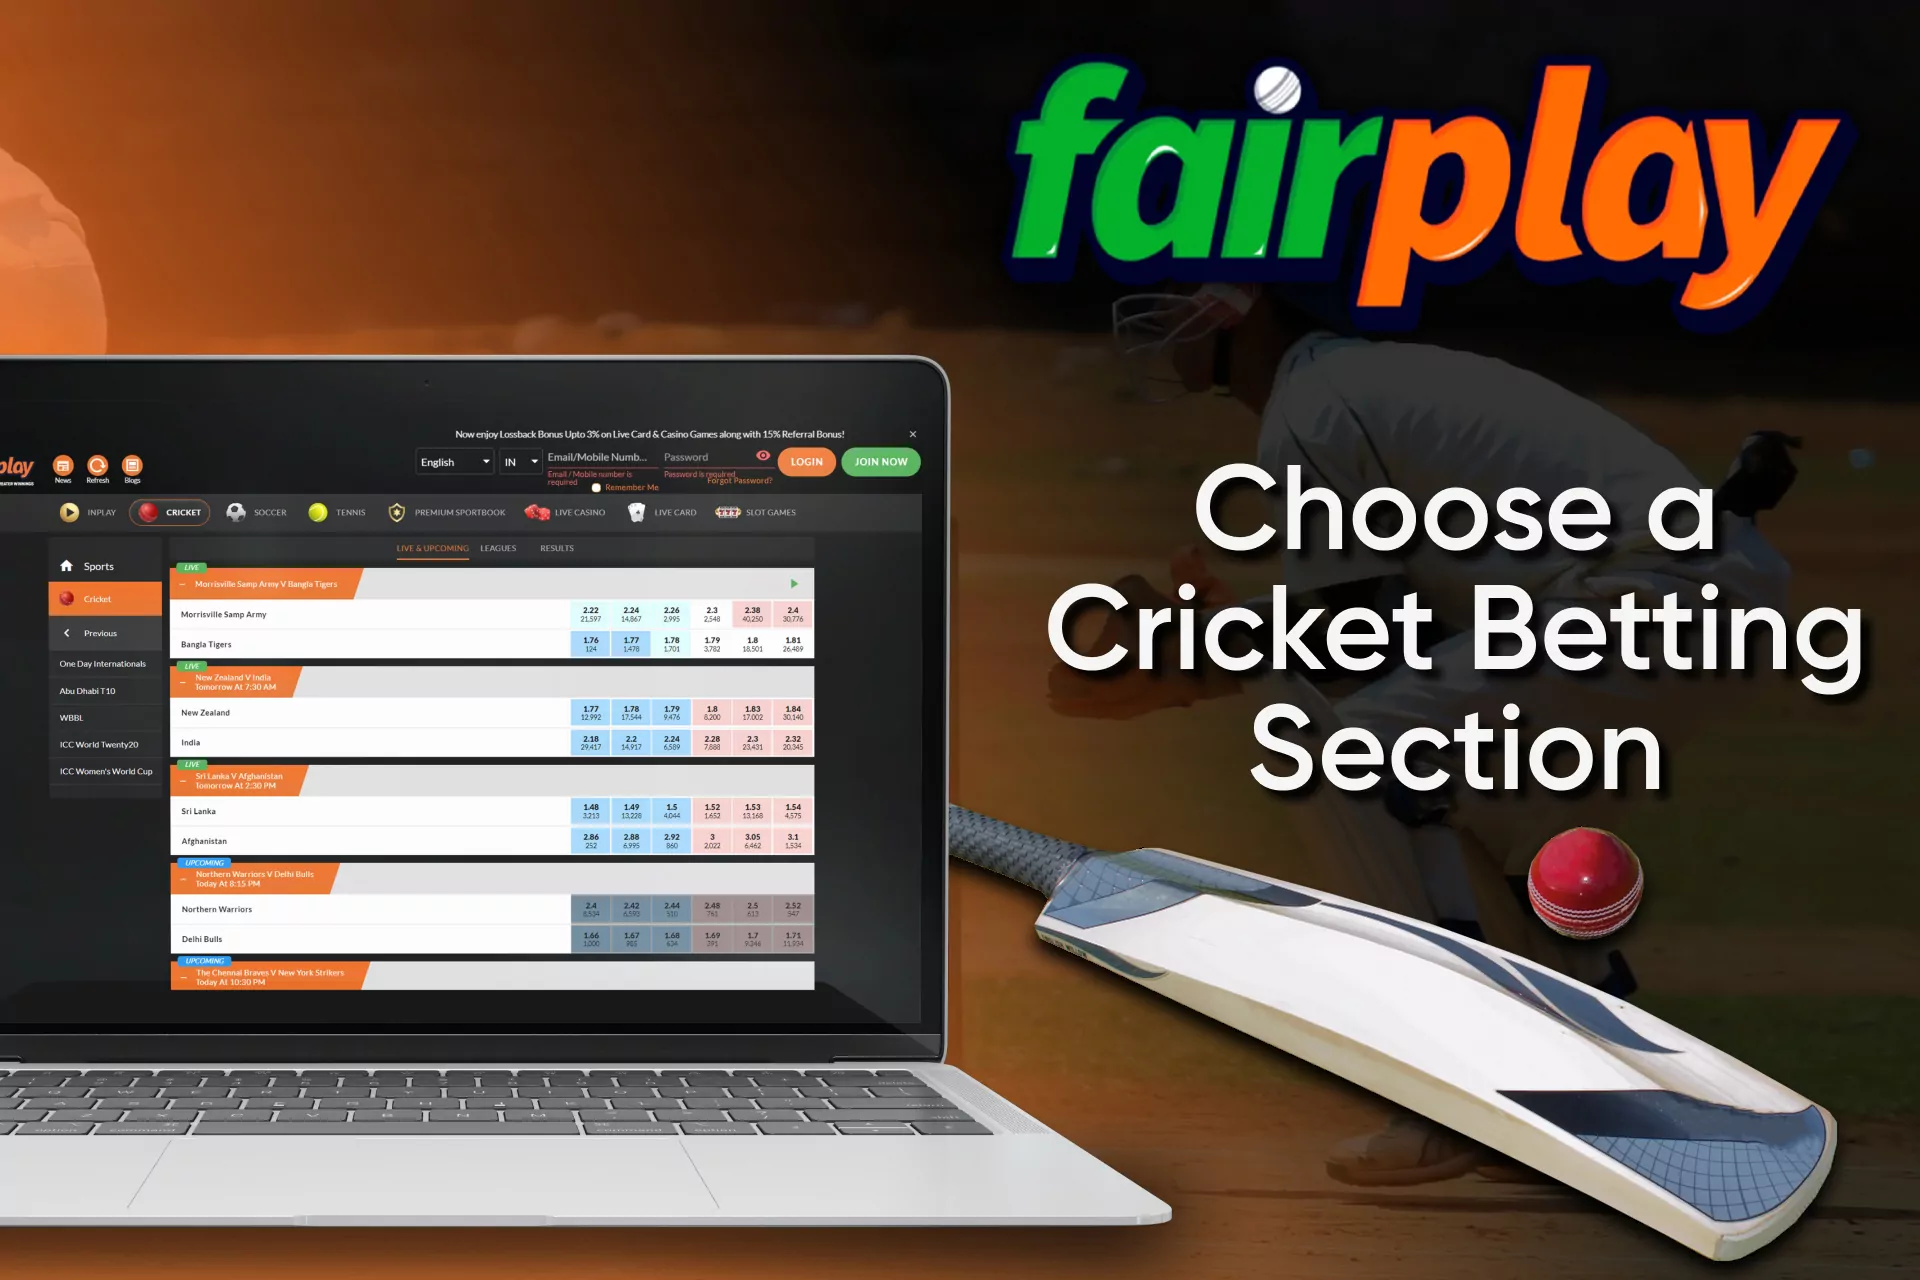 Look through the sports and choose a cricket match you want to bet on Fairplay.